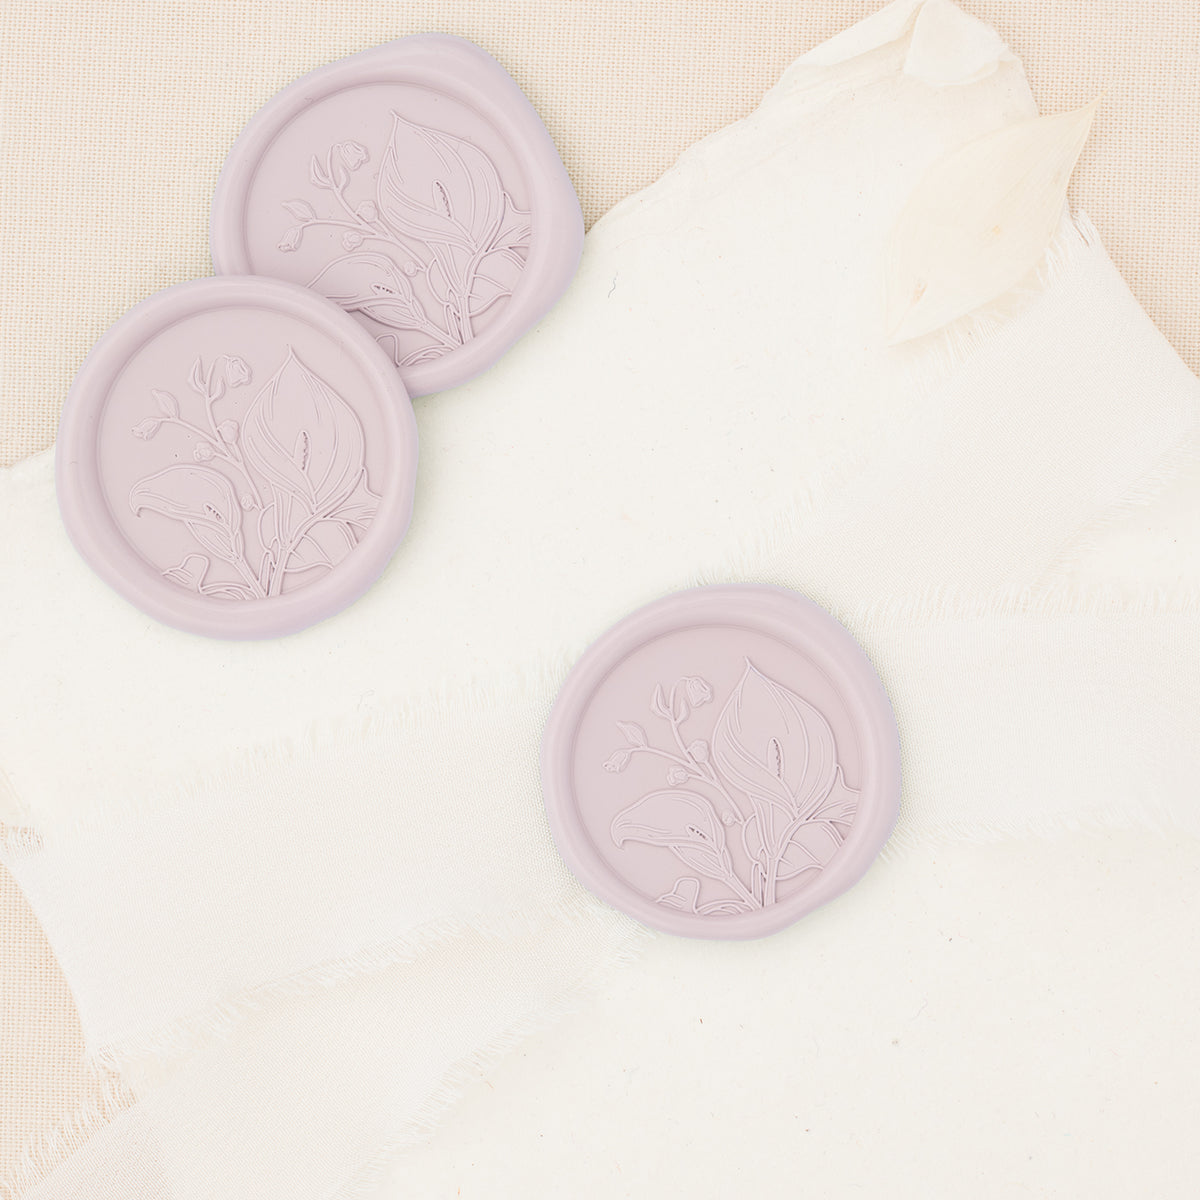 Olive Wreath in Sangria | Maurelle Calligraphy x Artisaire (pack of 25) Wax  Seals by undefined